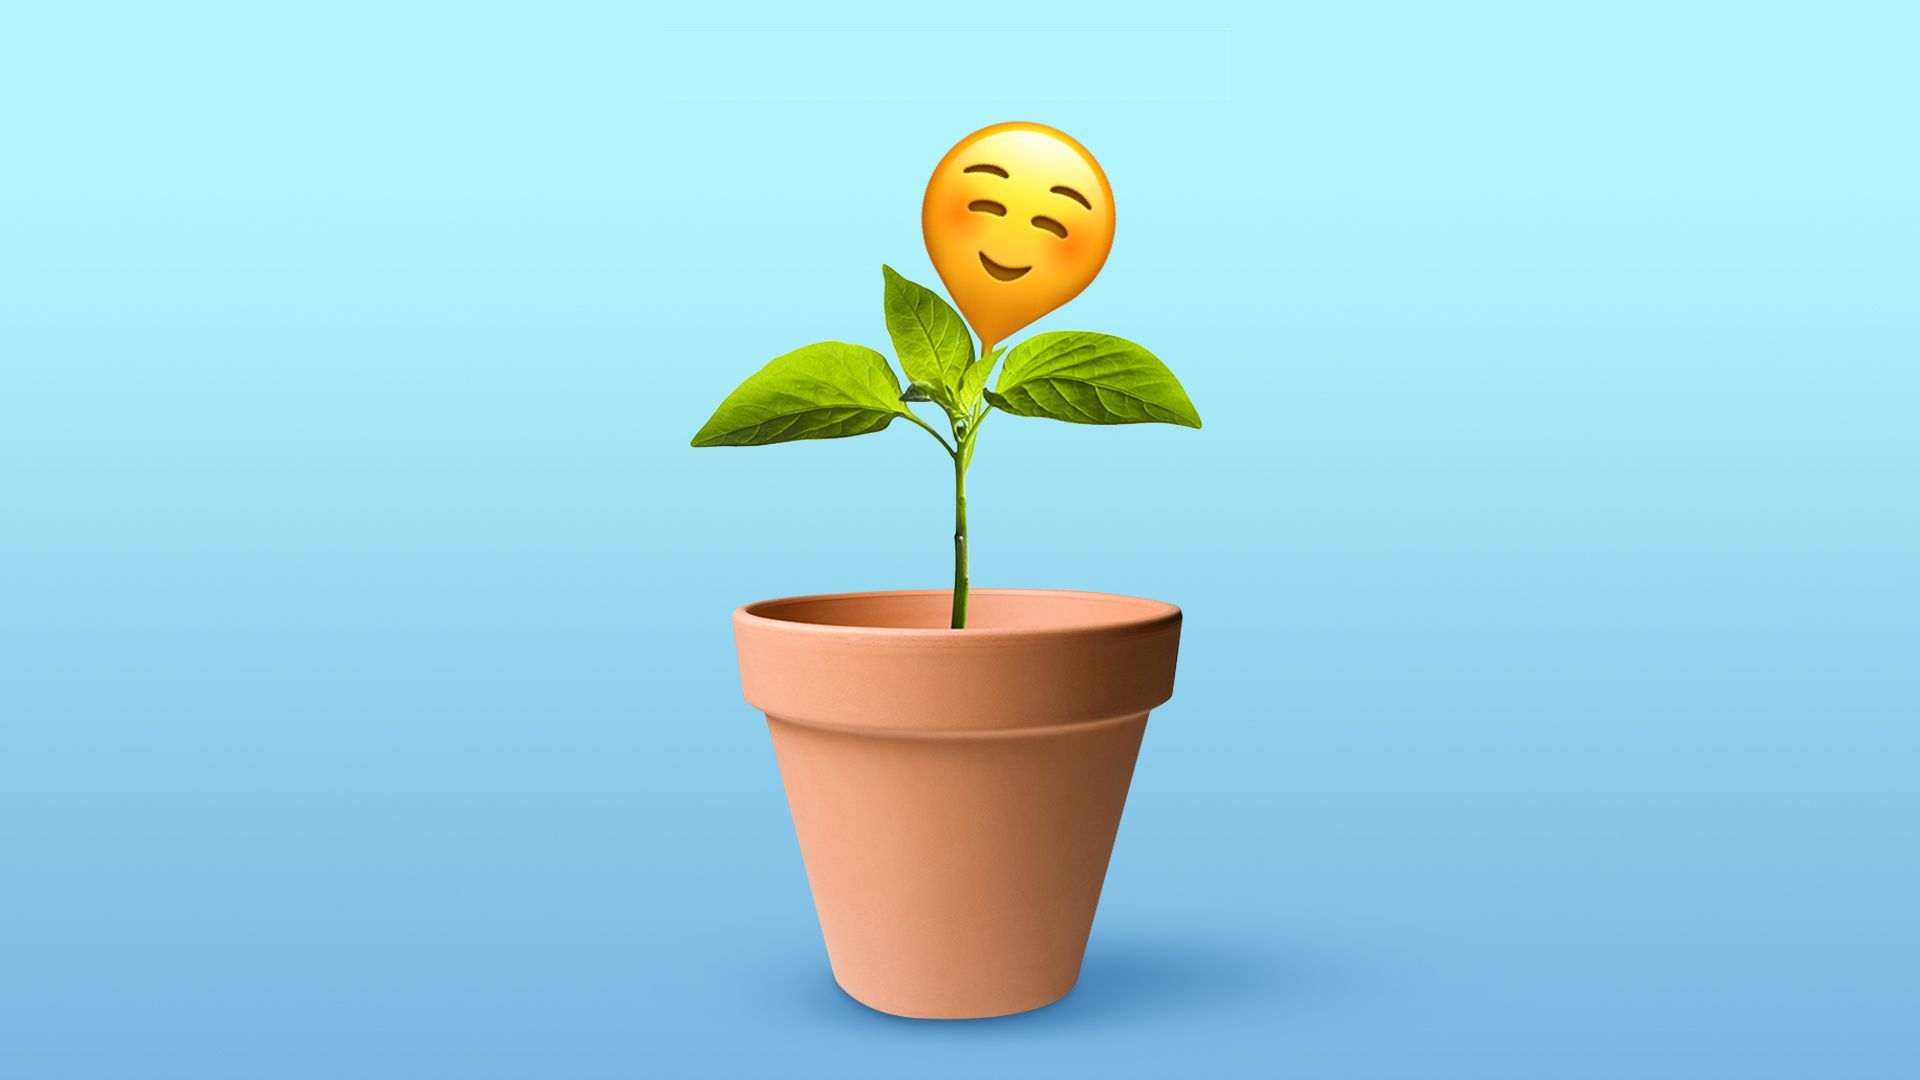 Illustration of a smiley face sprouting from a potted plant